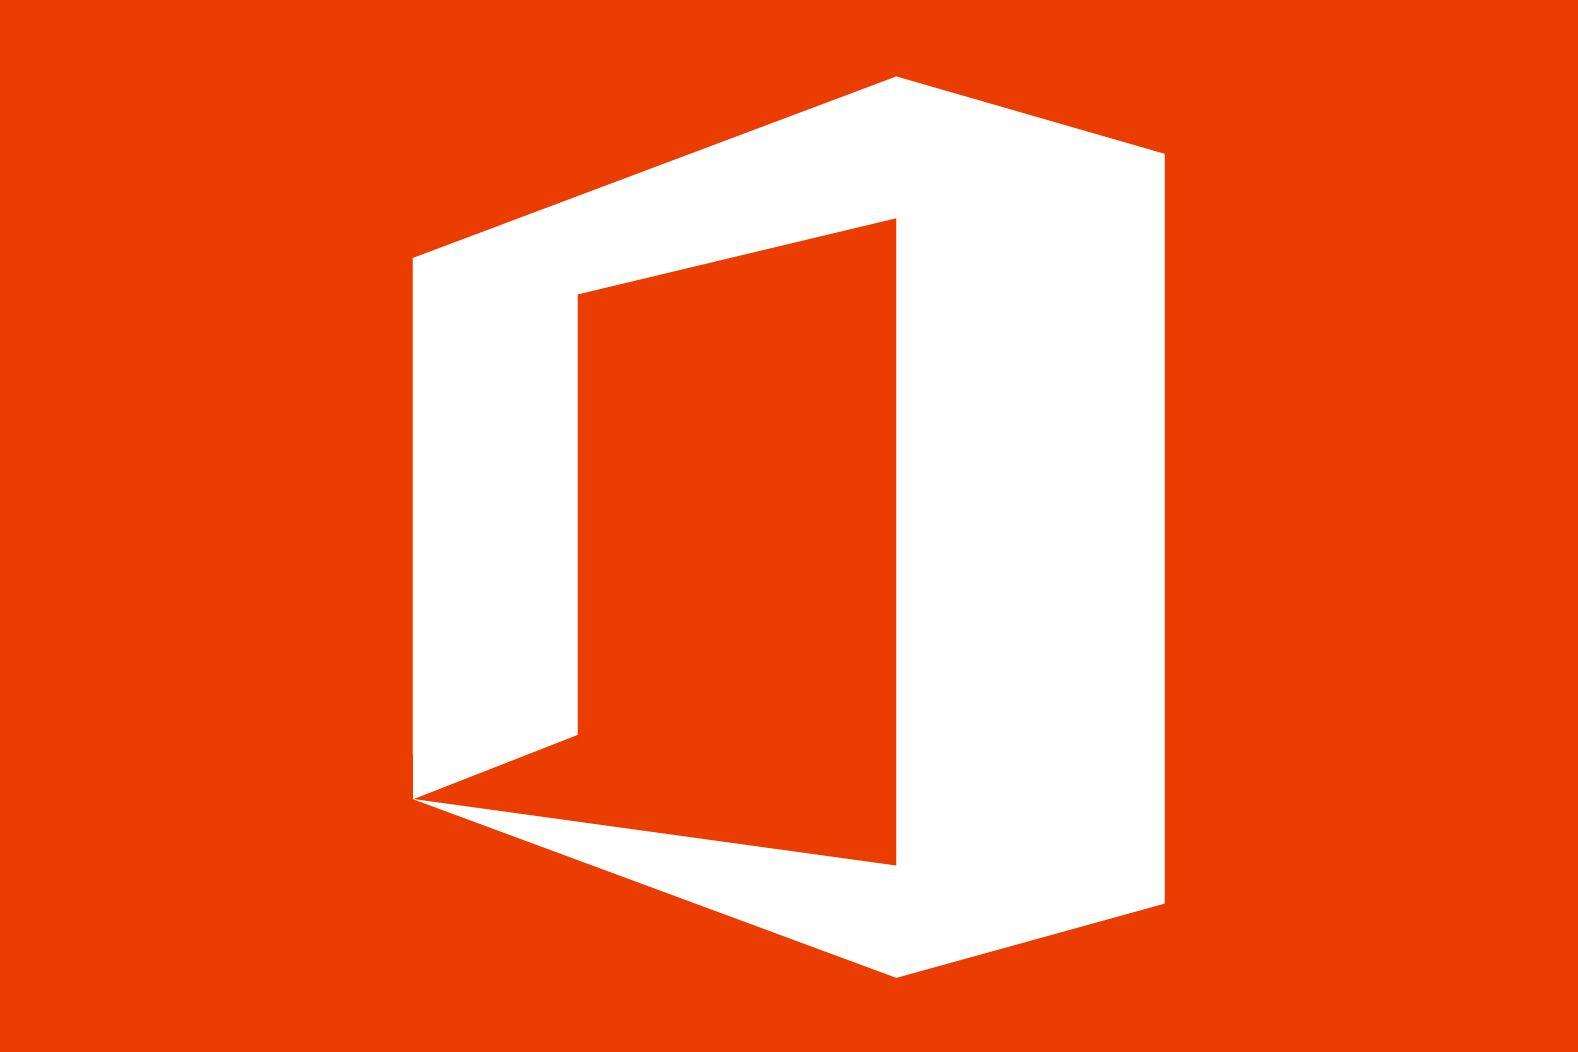 Microsoft Office Logo - Office 2019 will have one big system requirement: Windows 10